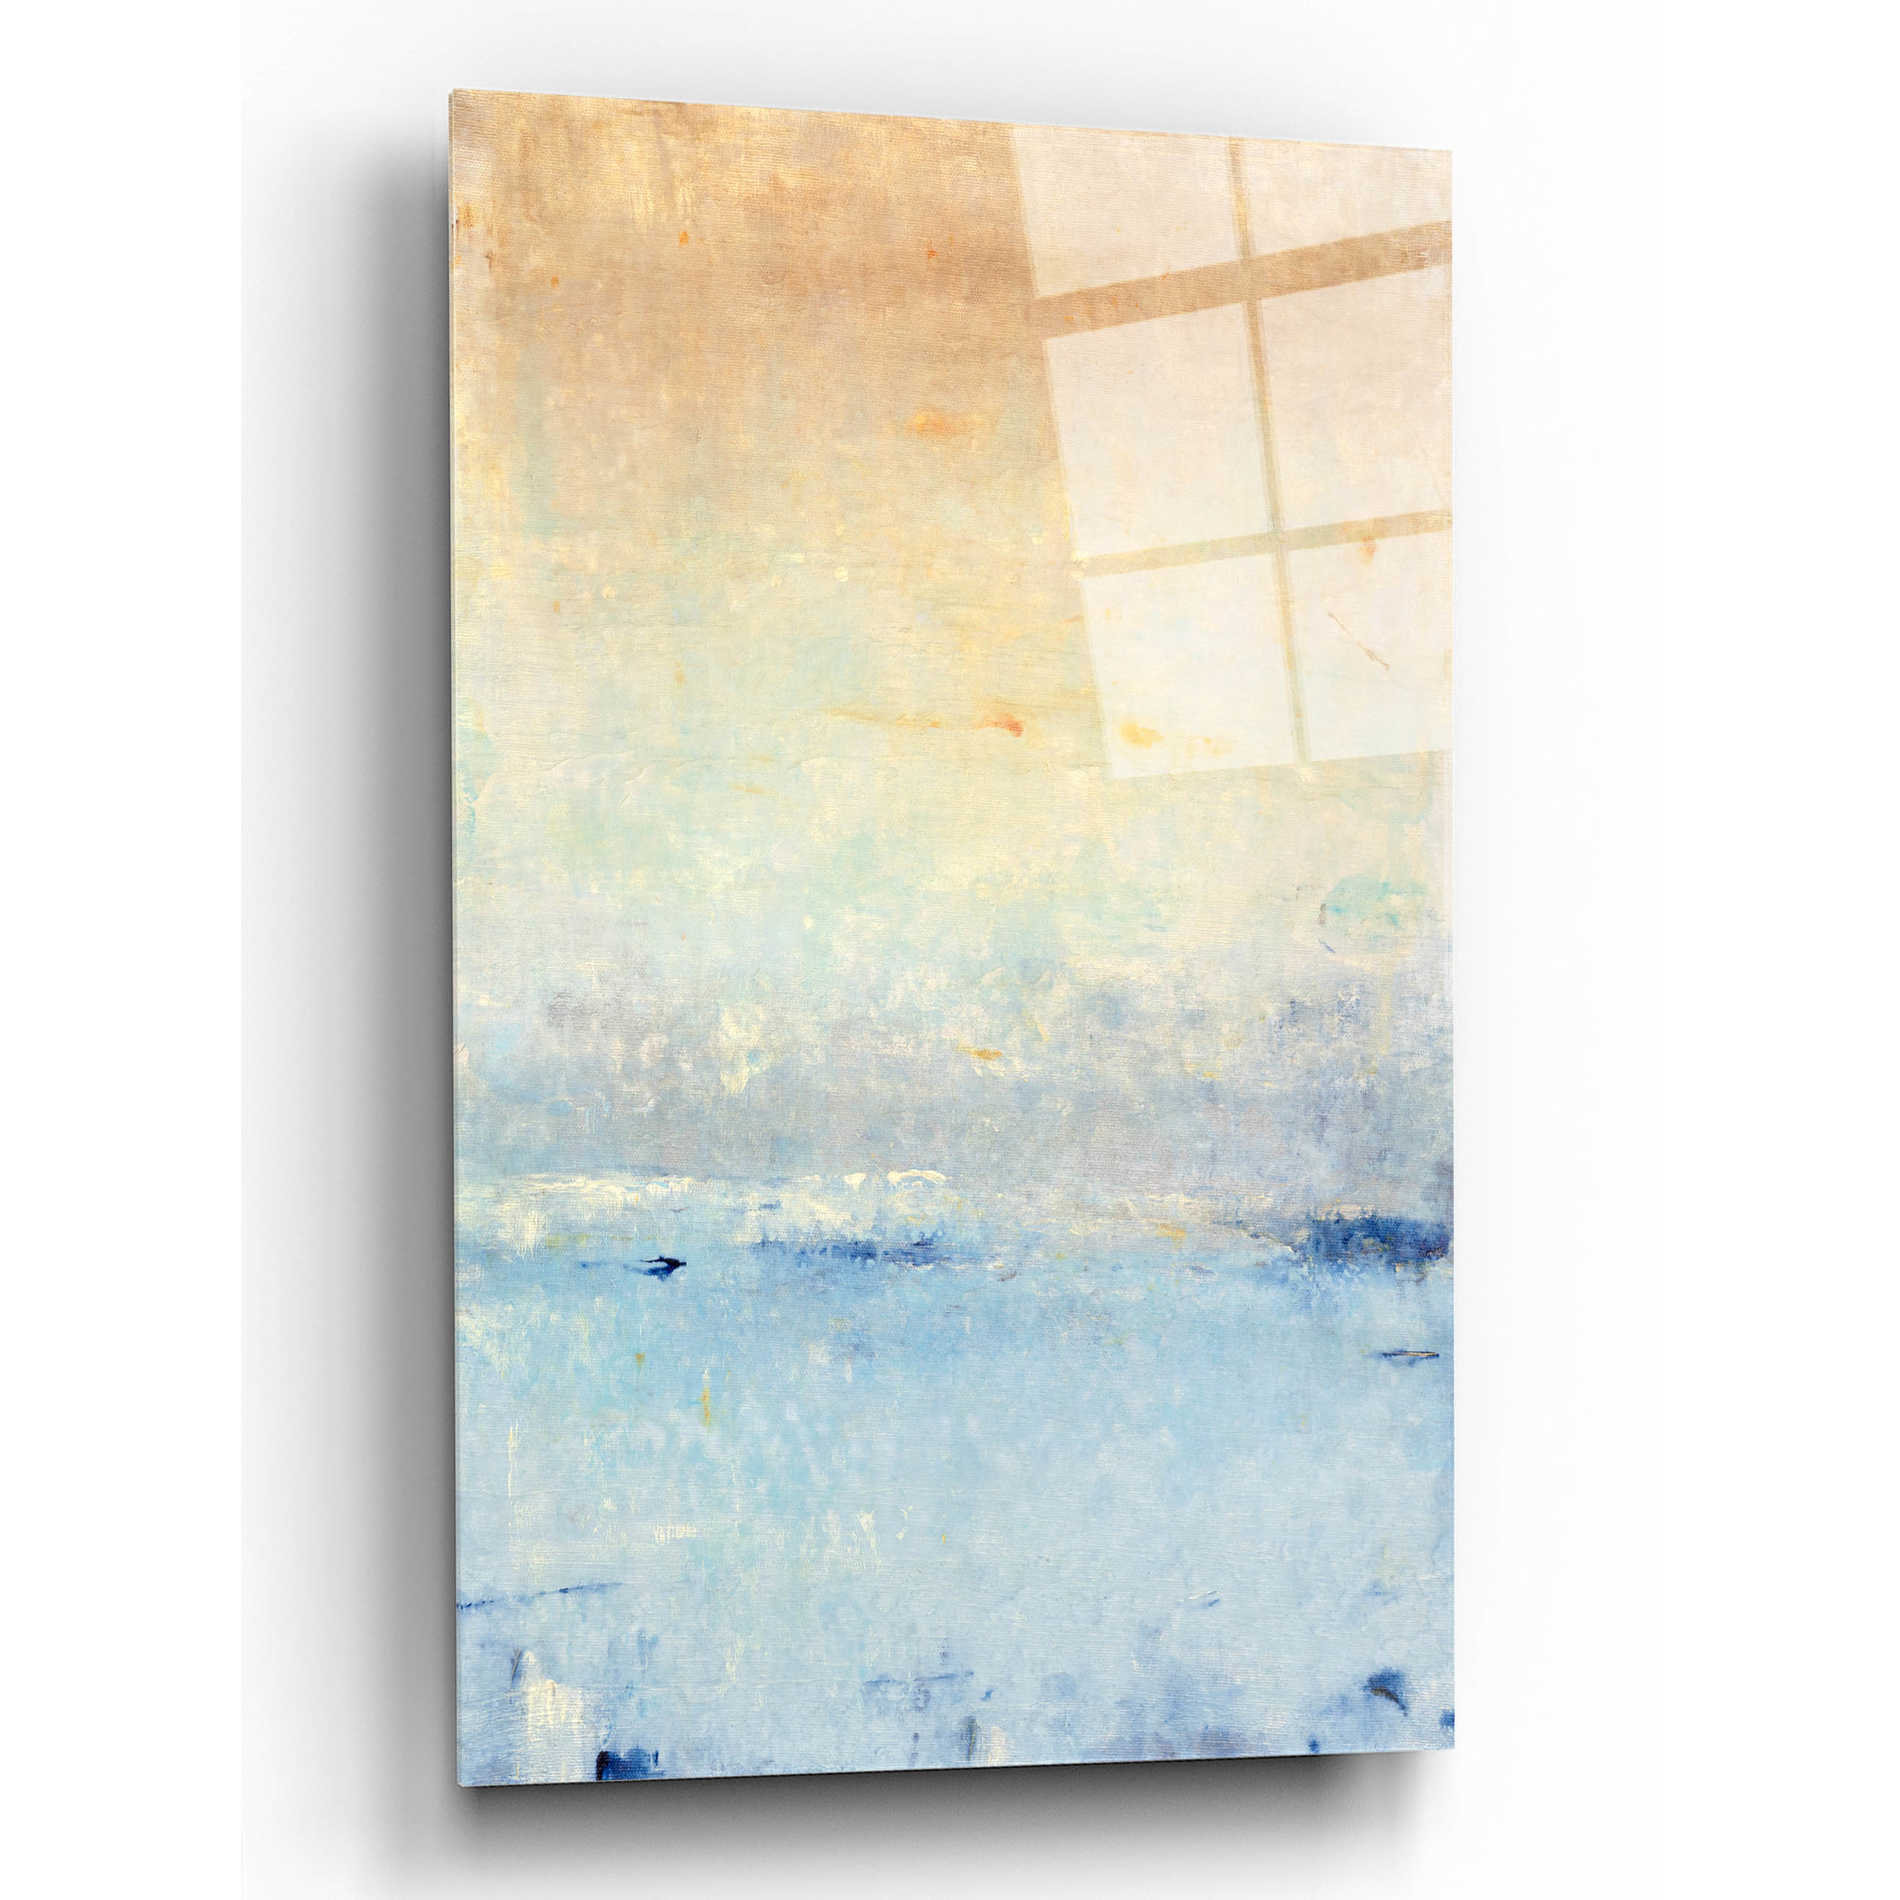 Epic Art 'Inlet at Sunrise I' by Tim O'Toole, Acrylic Glass Wall Art,12x16